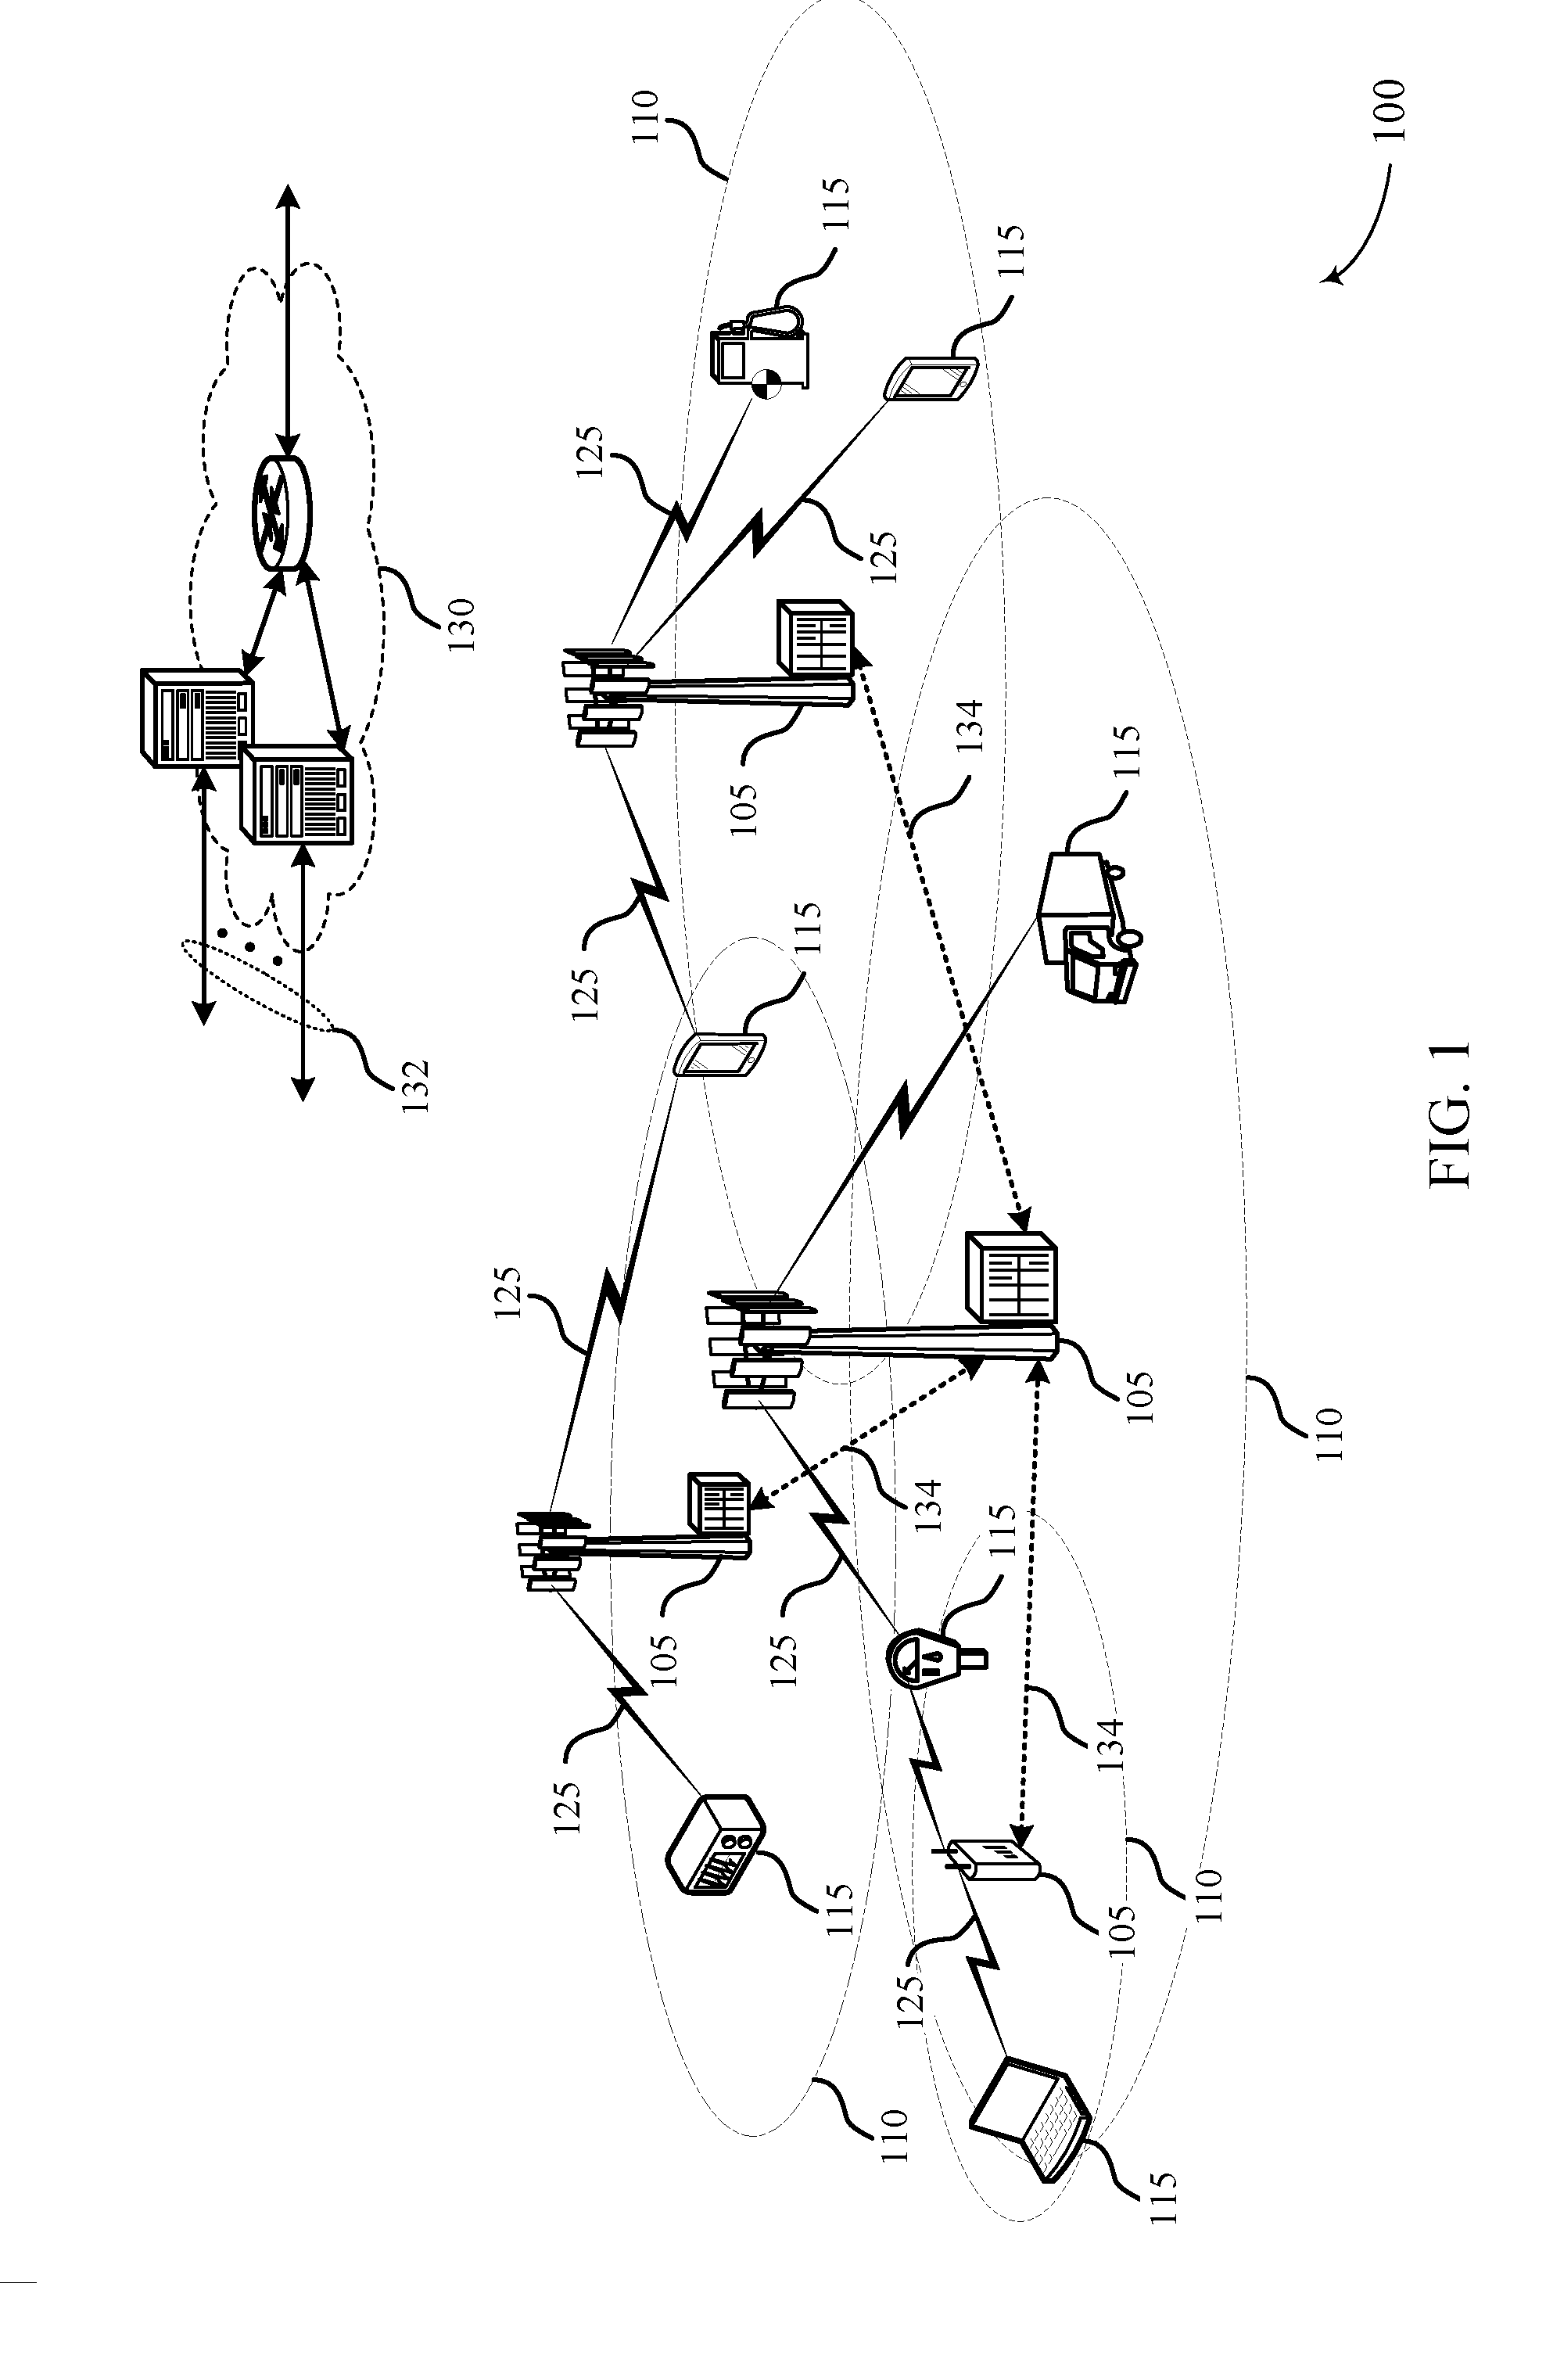 Small data transmission in a wireless communications system